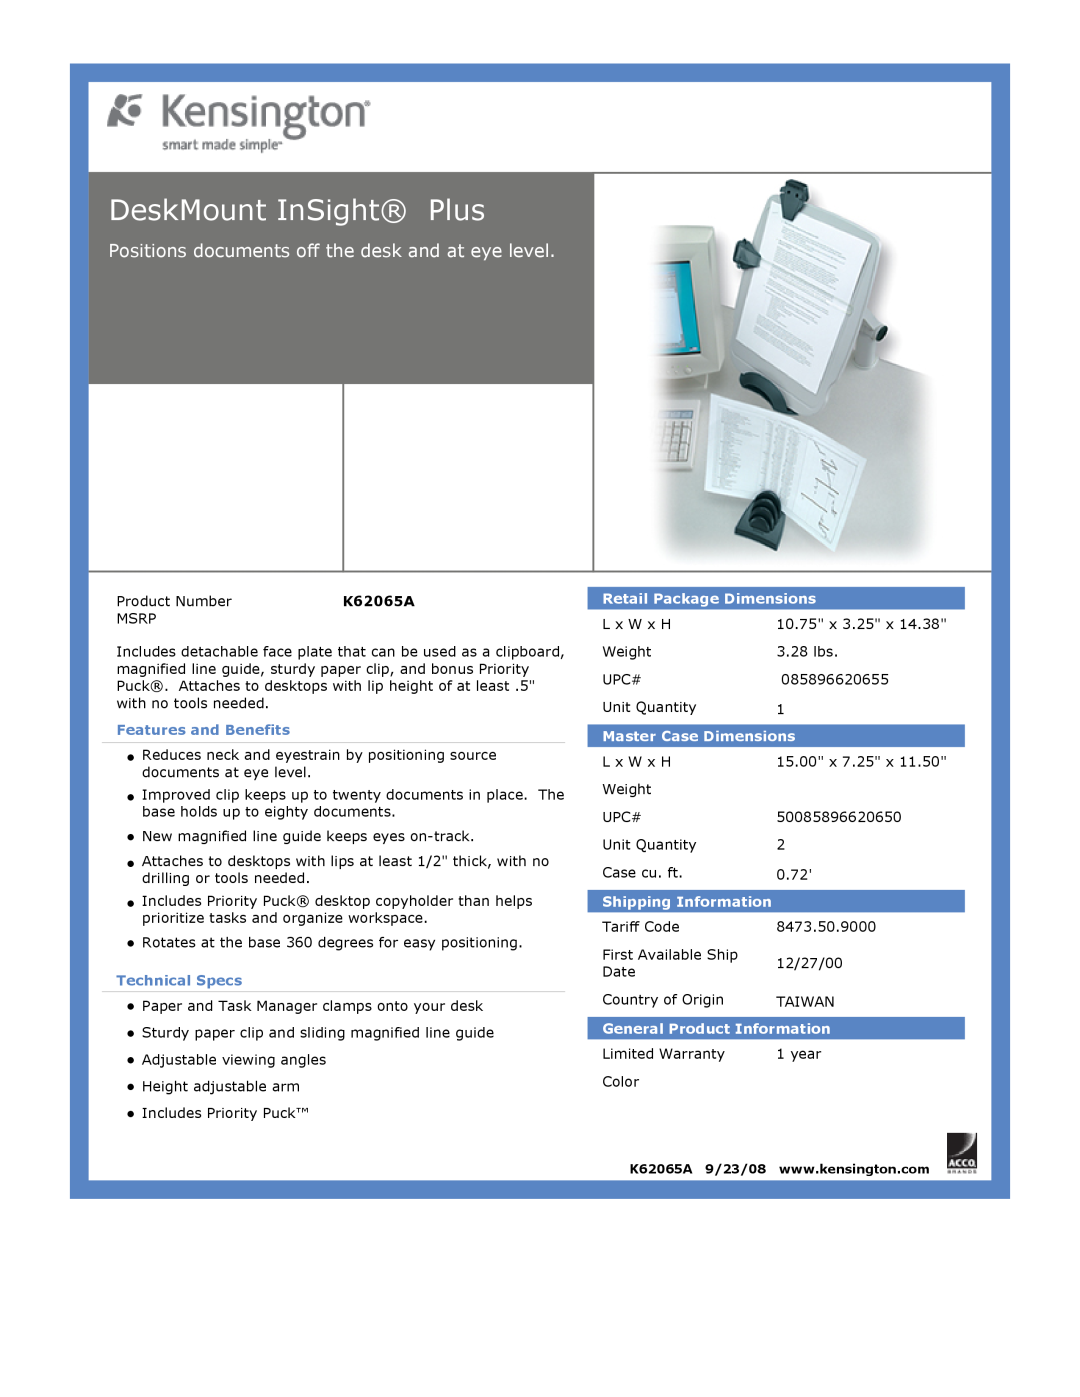 Kensington K62065A dimensions DeskMount InSight Plus, Positions documents off the desk and at eye level, Technical Specs 